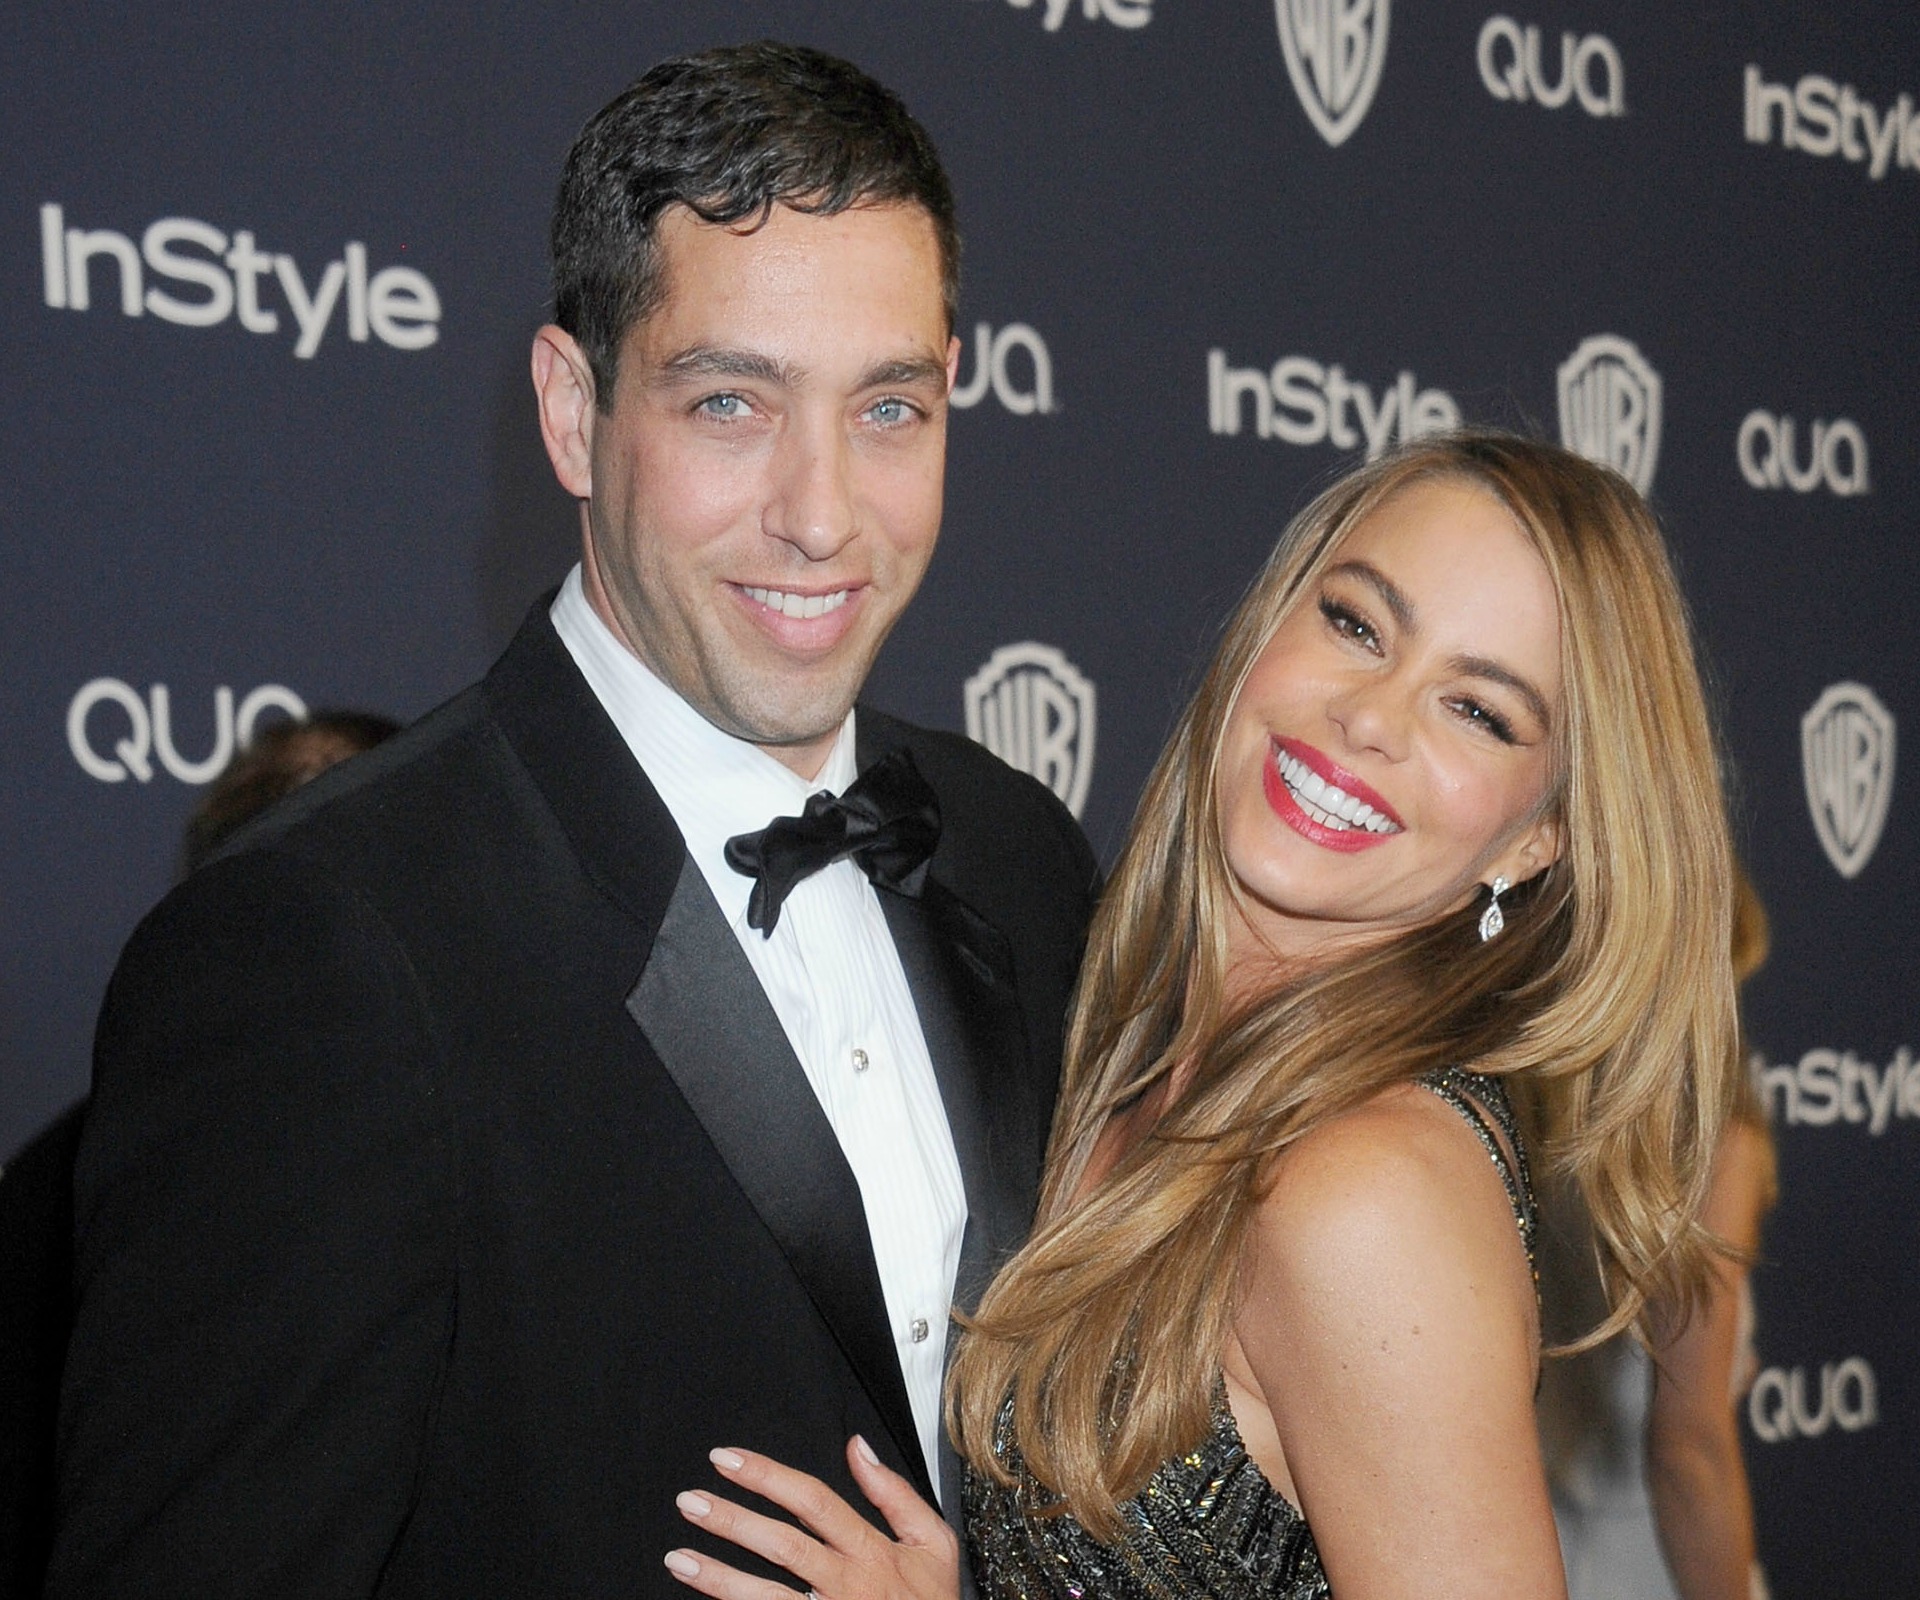 Sofia Vergara’s ex says the frozen embryo’s he created with her “have right to live”